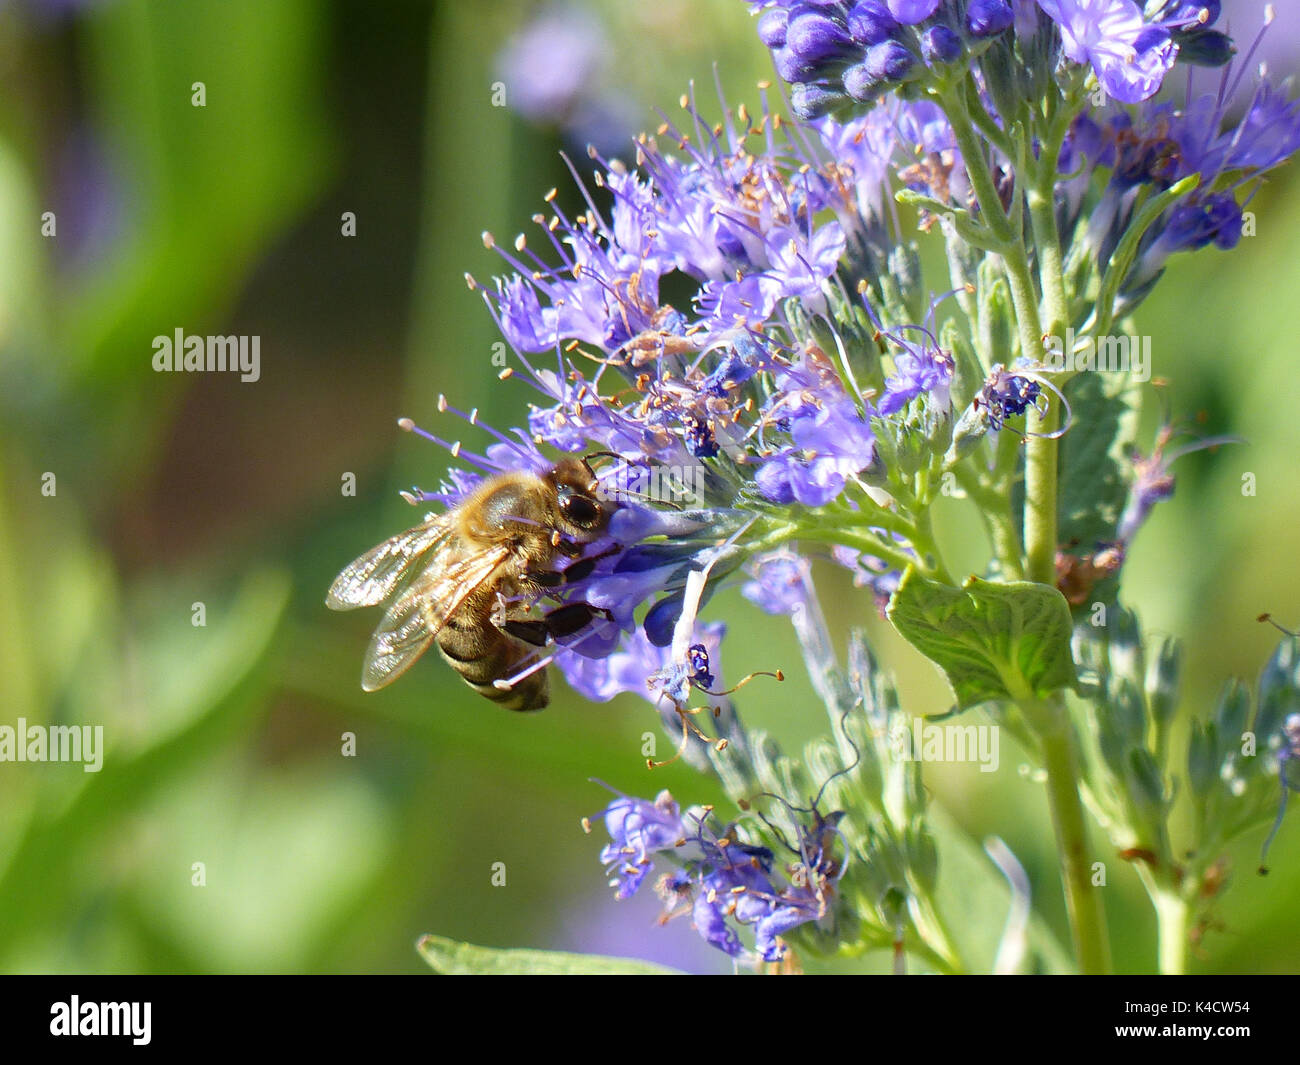 Honey Bee On A Violet Flower With Green Background Stock Photo